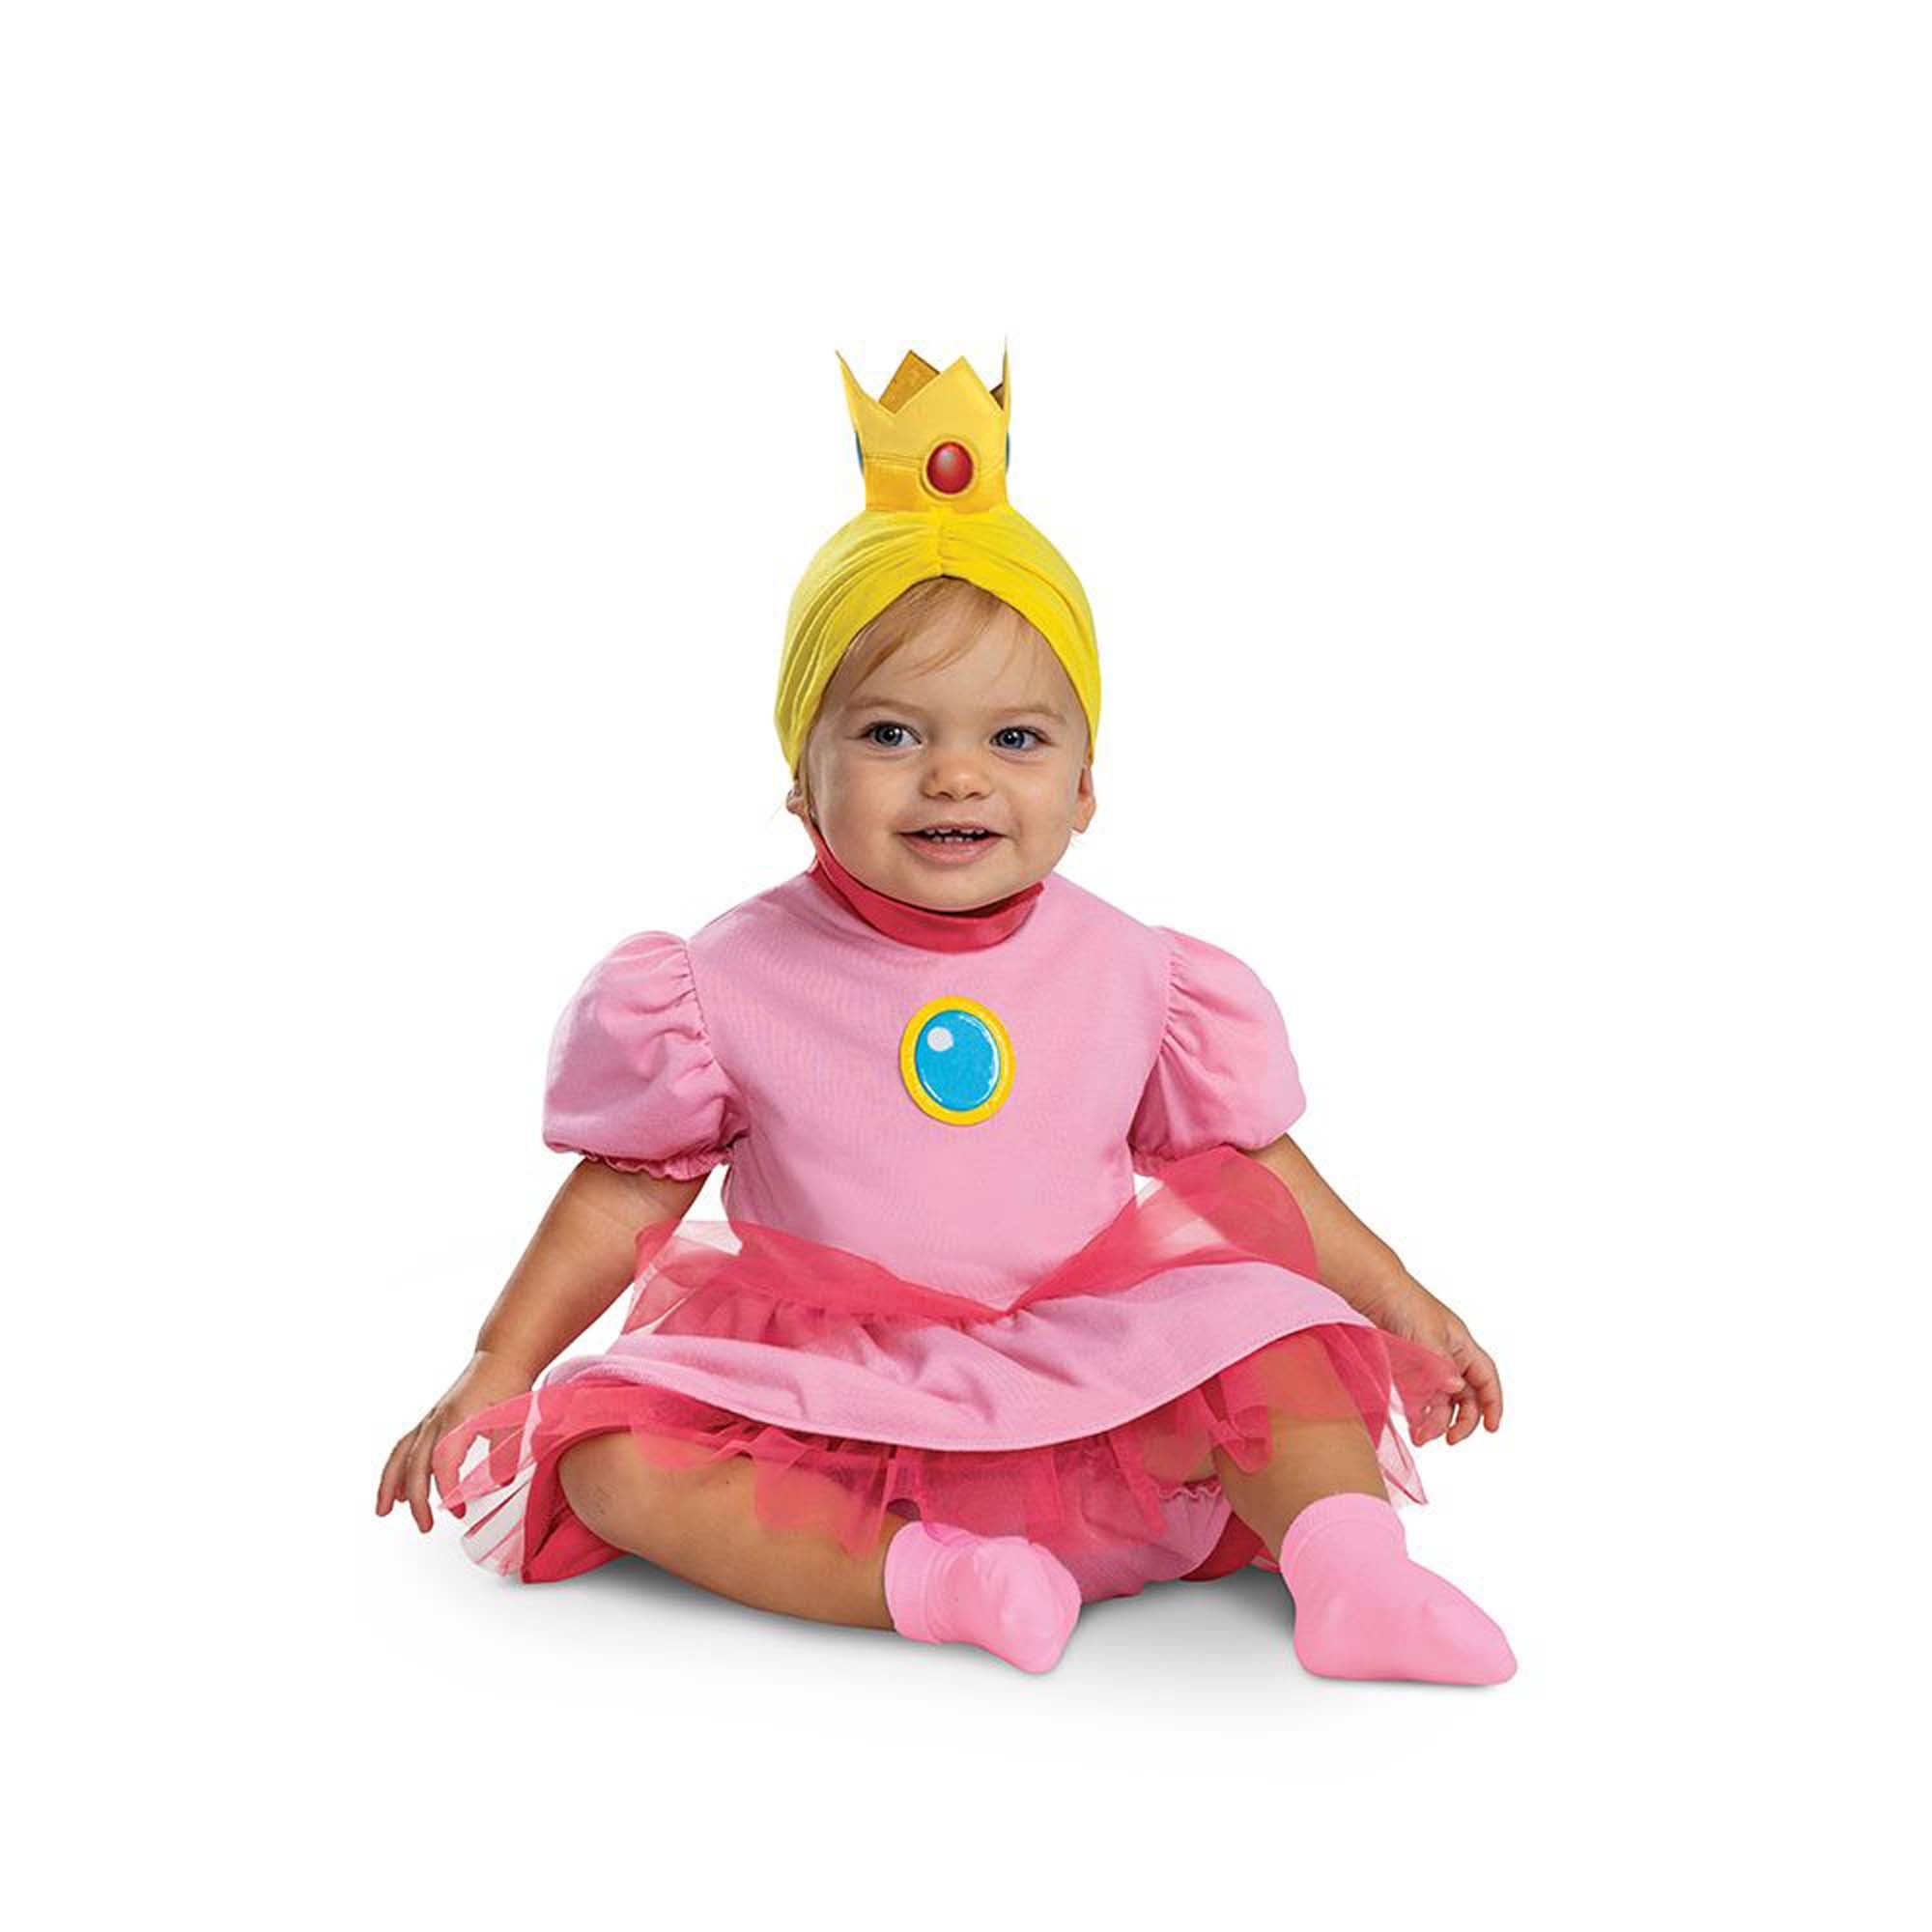 http://www.party-expert.com/cdn/shop/files/disguise-toy-sport-costumes-nintendo-super-mario-bros-princess-peach-dress-costume-for-babies-pink-dress-and-bloomers-33208122802362.jpg?v=1684350324&width=2000